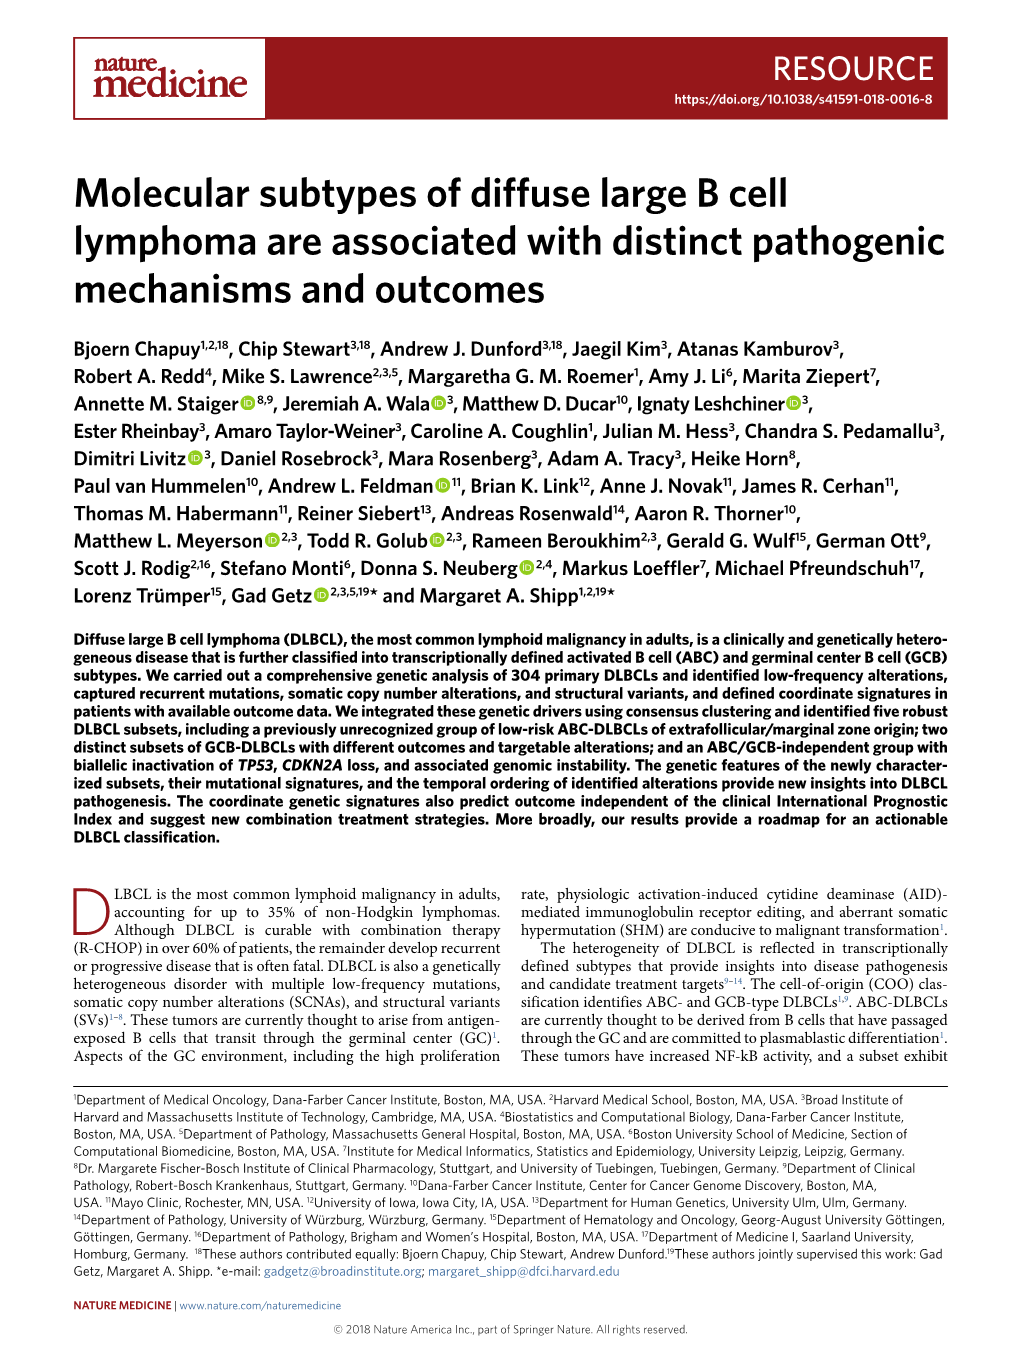 Molecular Subtypes of Diffuse Large B Cell Lymphoma Are Associated with Distinct Pathogenic Mechanisms and Outcomes